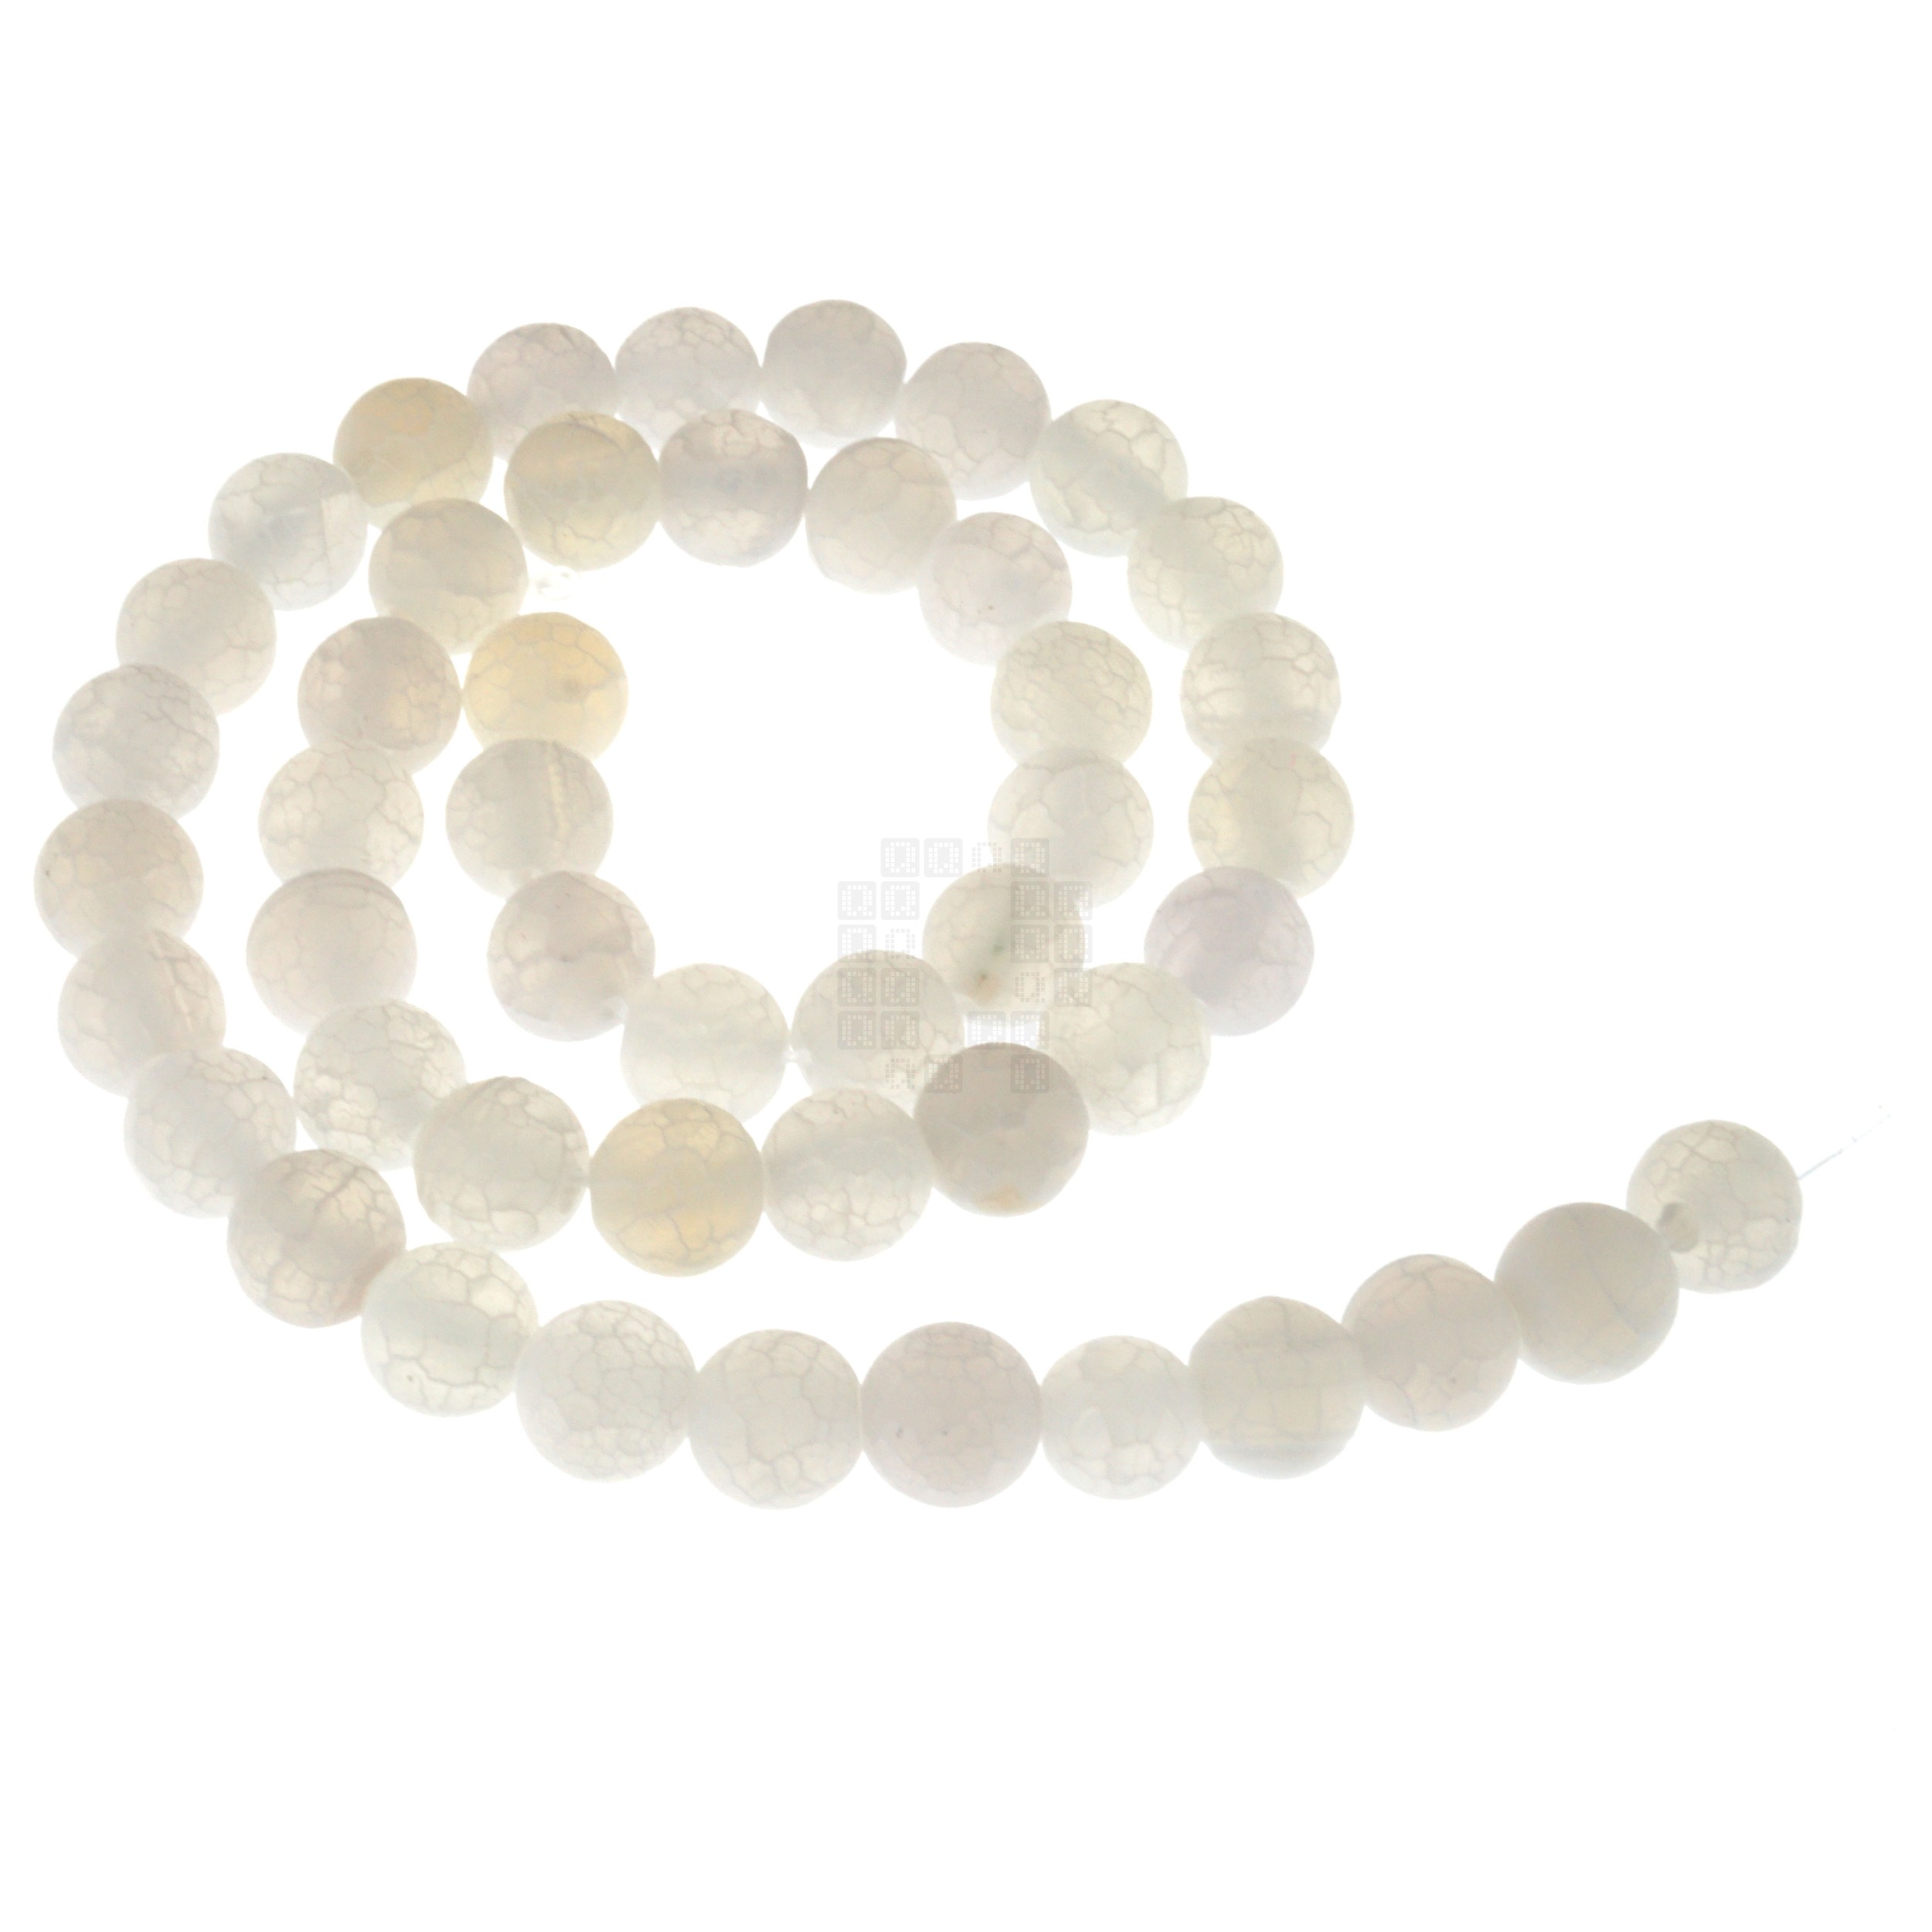 White Frost Cracked Agate 8mm Round Beads, 45 Pieces